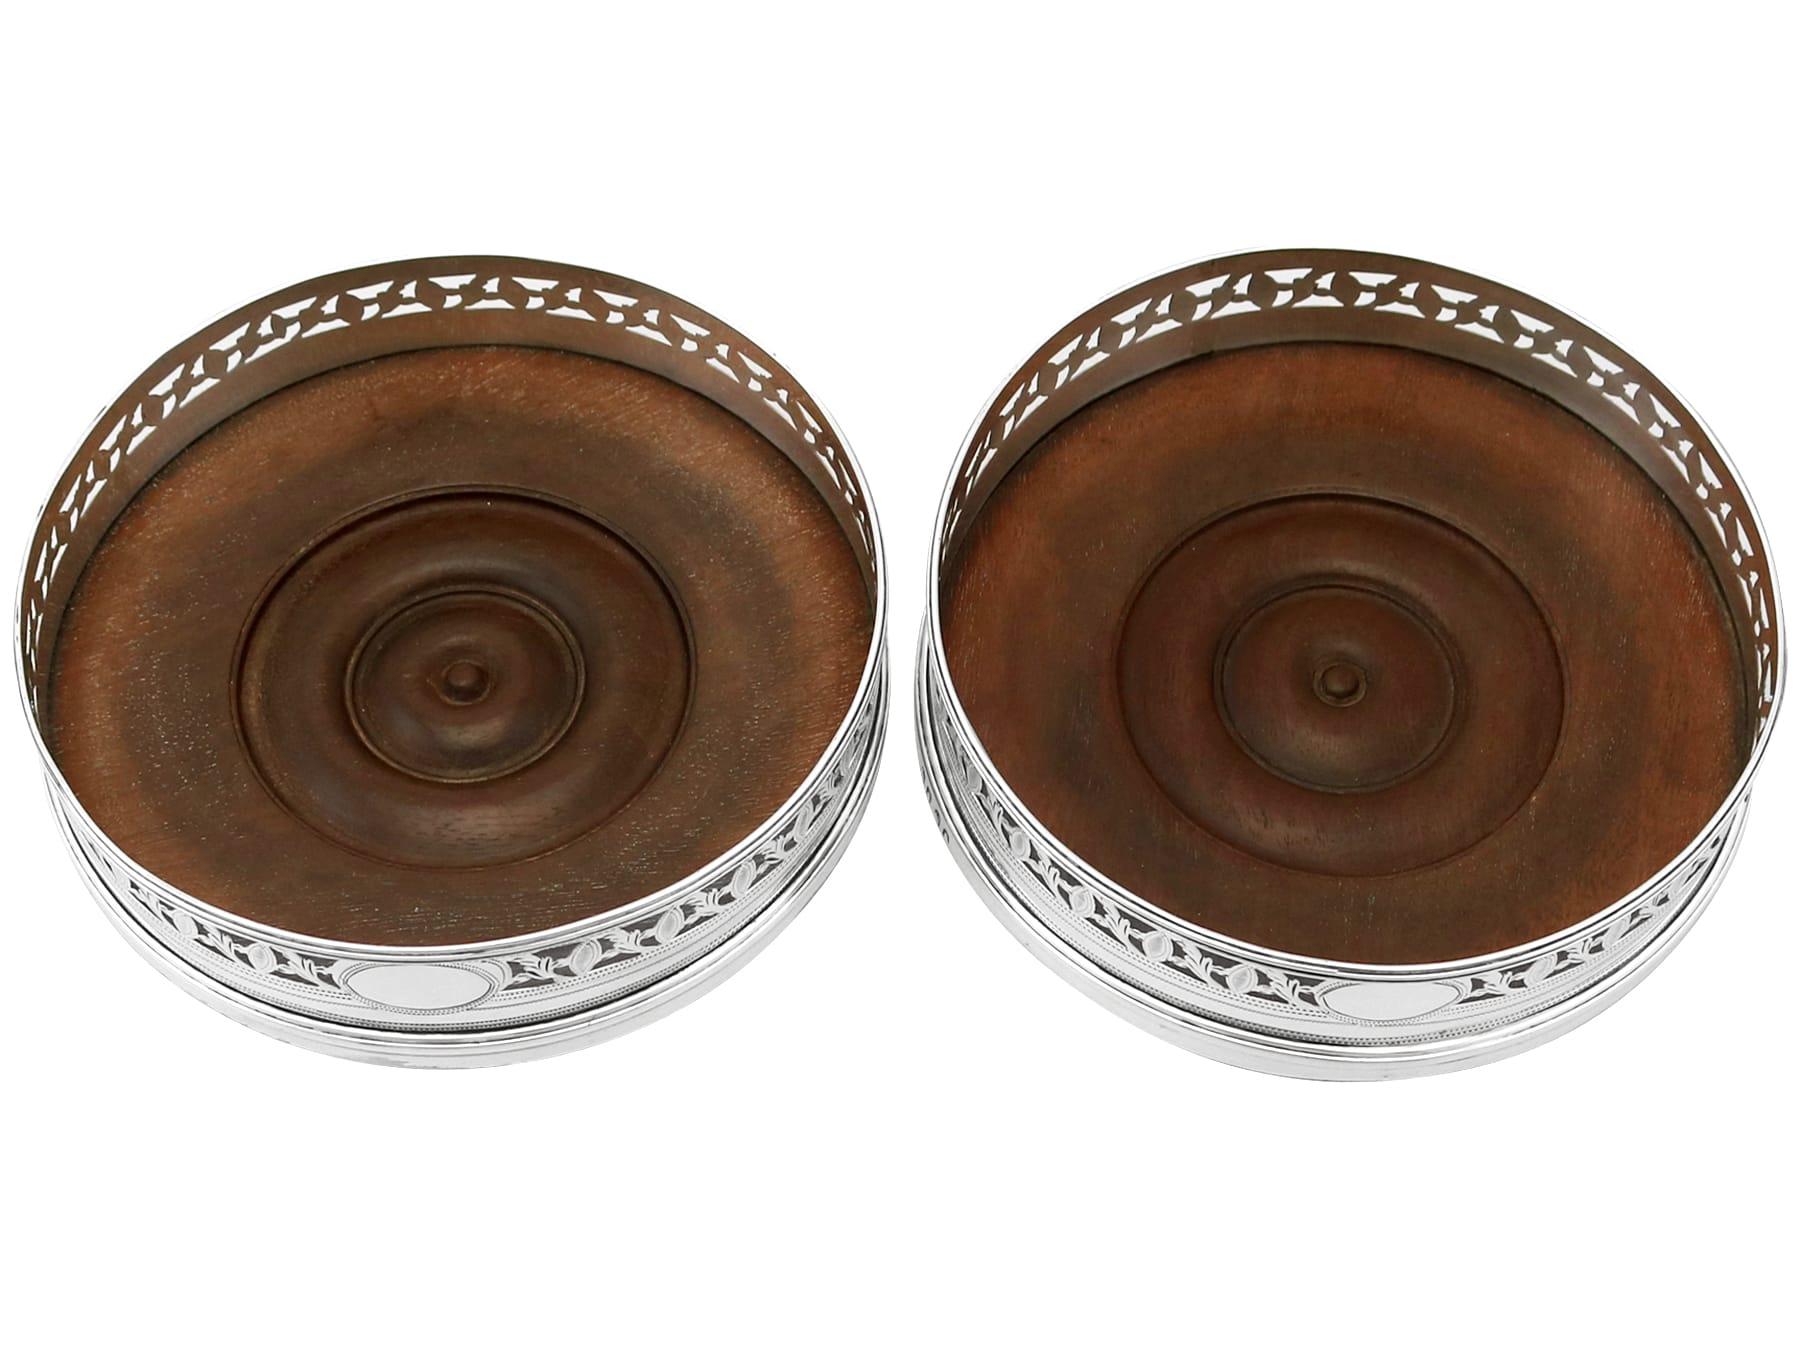 An exceptional, fine and impressive pair of antique Georgian English sterling silver coasters; part of our wine and drinks related silverware collection

These exceptional antique George III sterling silver wine bottle coasters have a circular